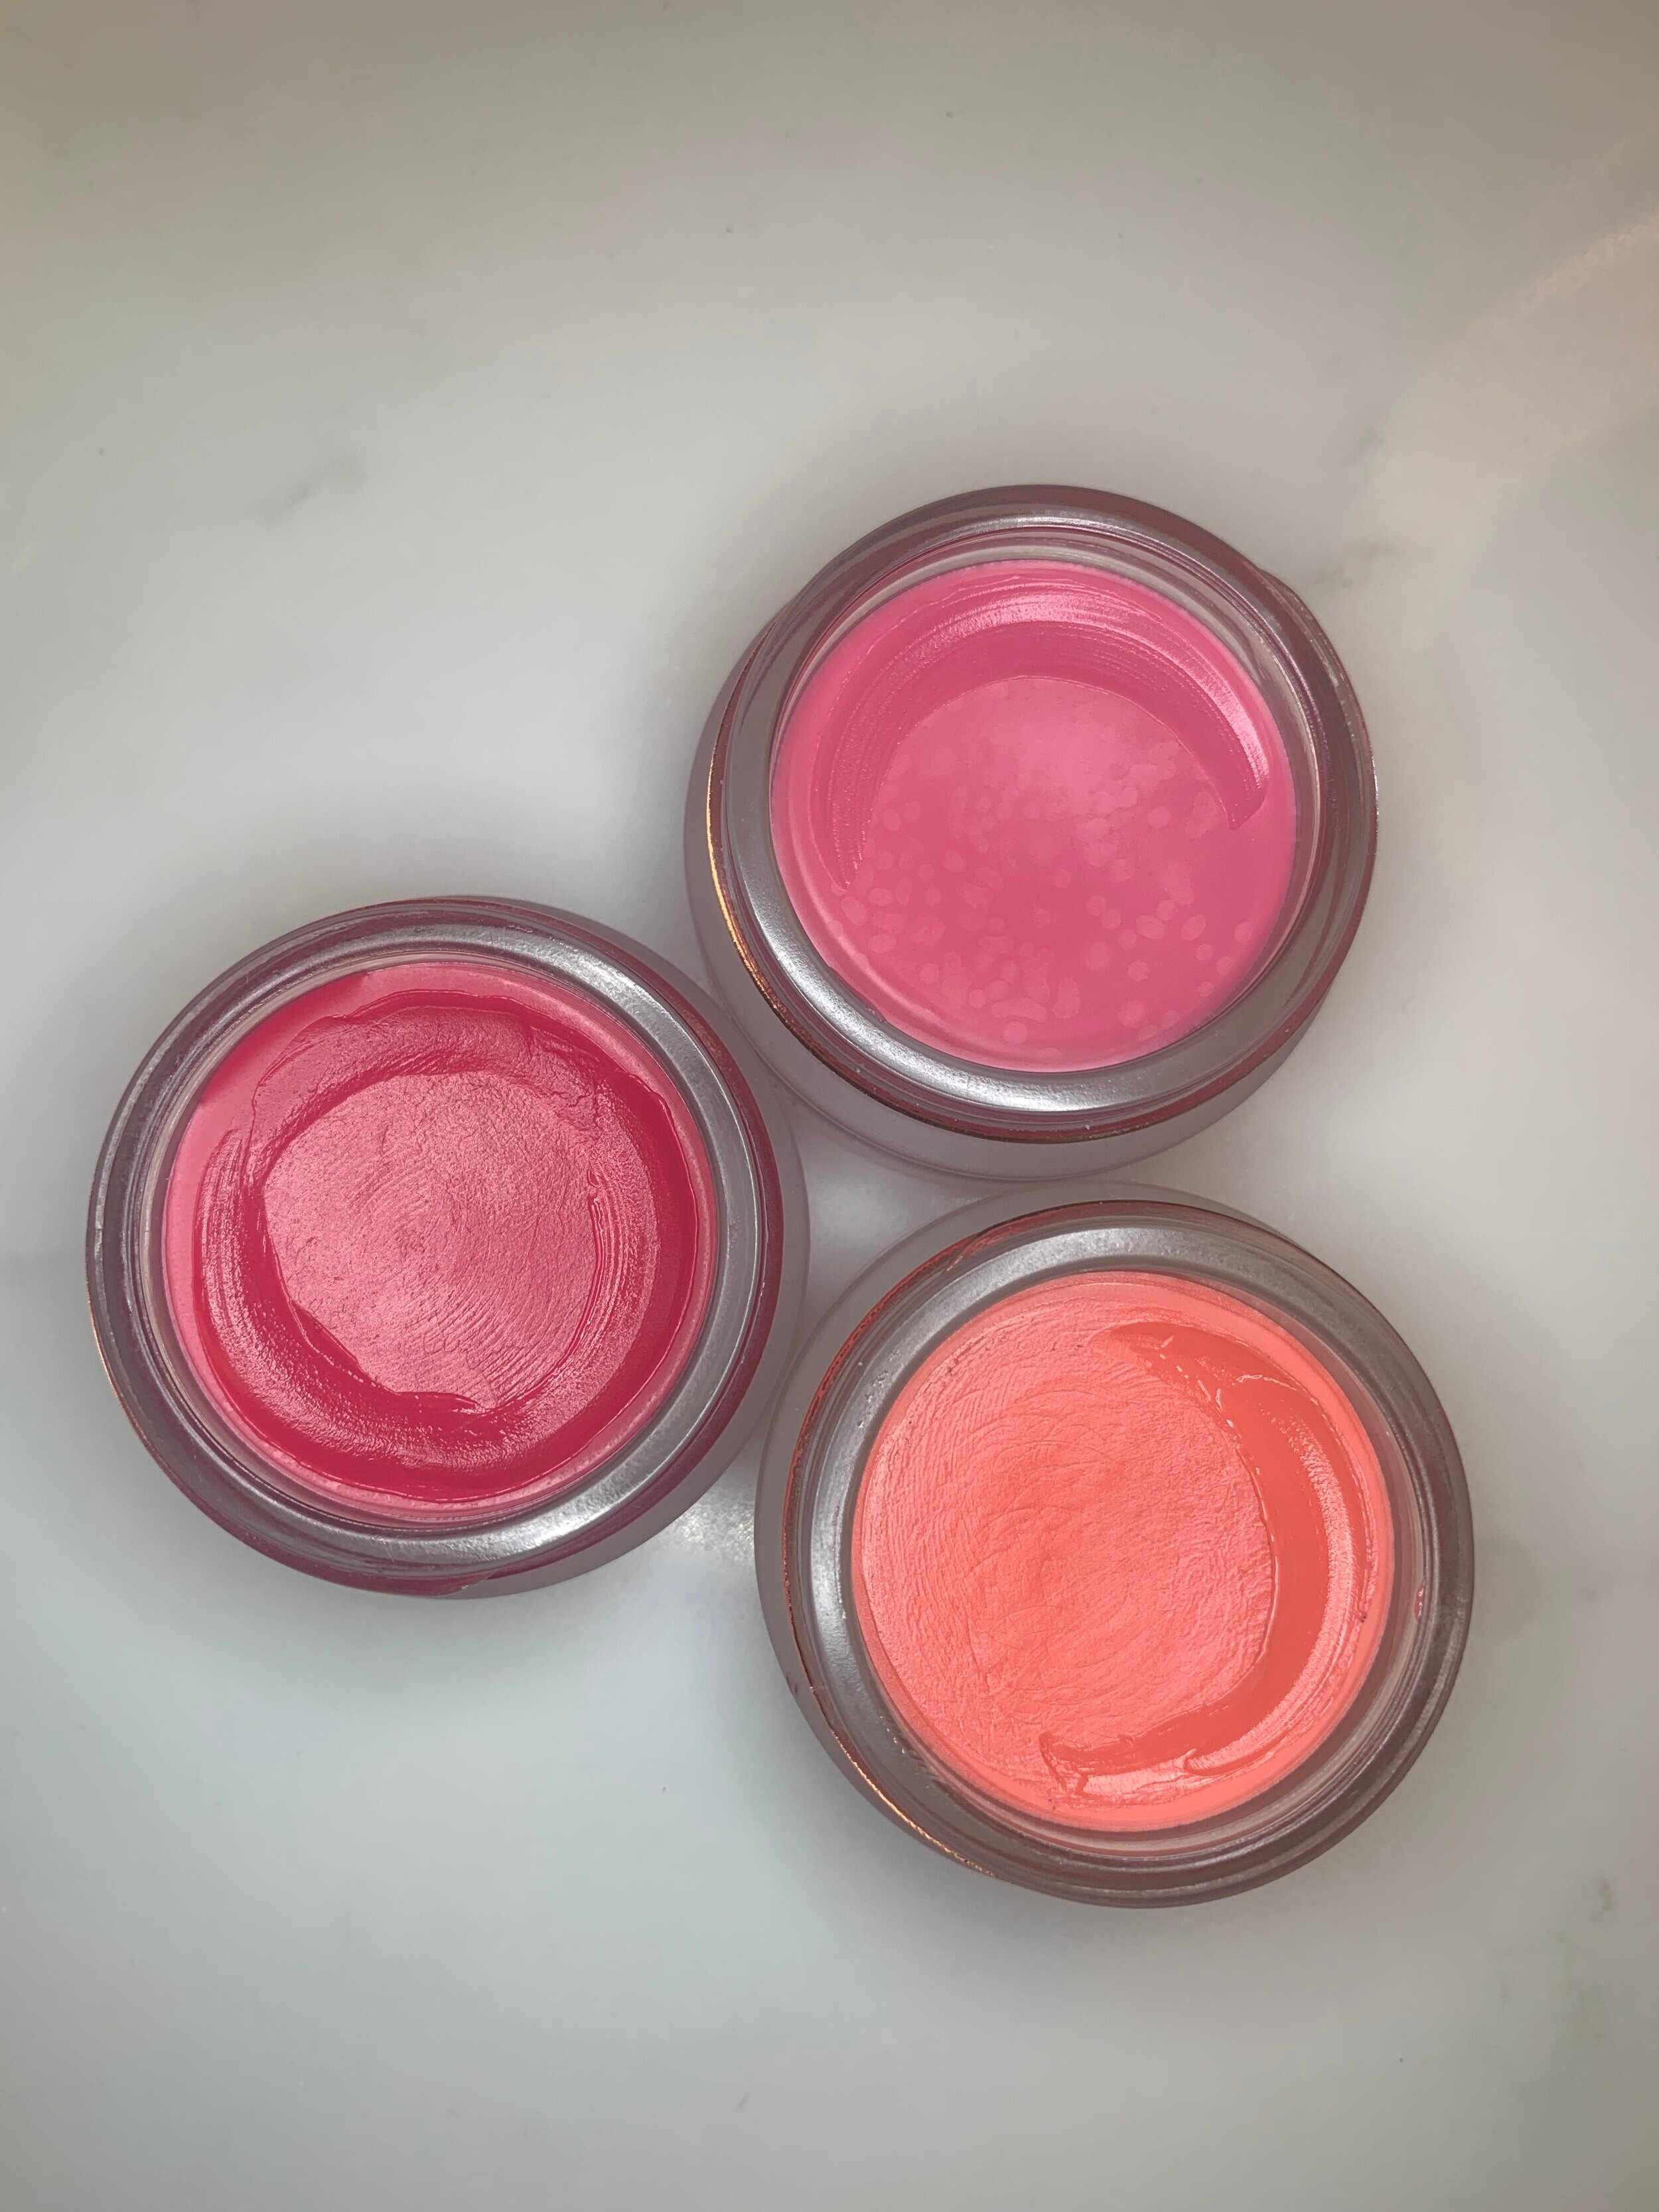 Iris and romeo power peptide lip balm review and tutorial